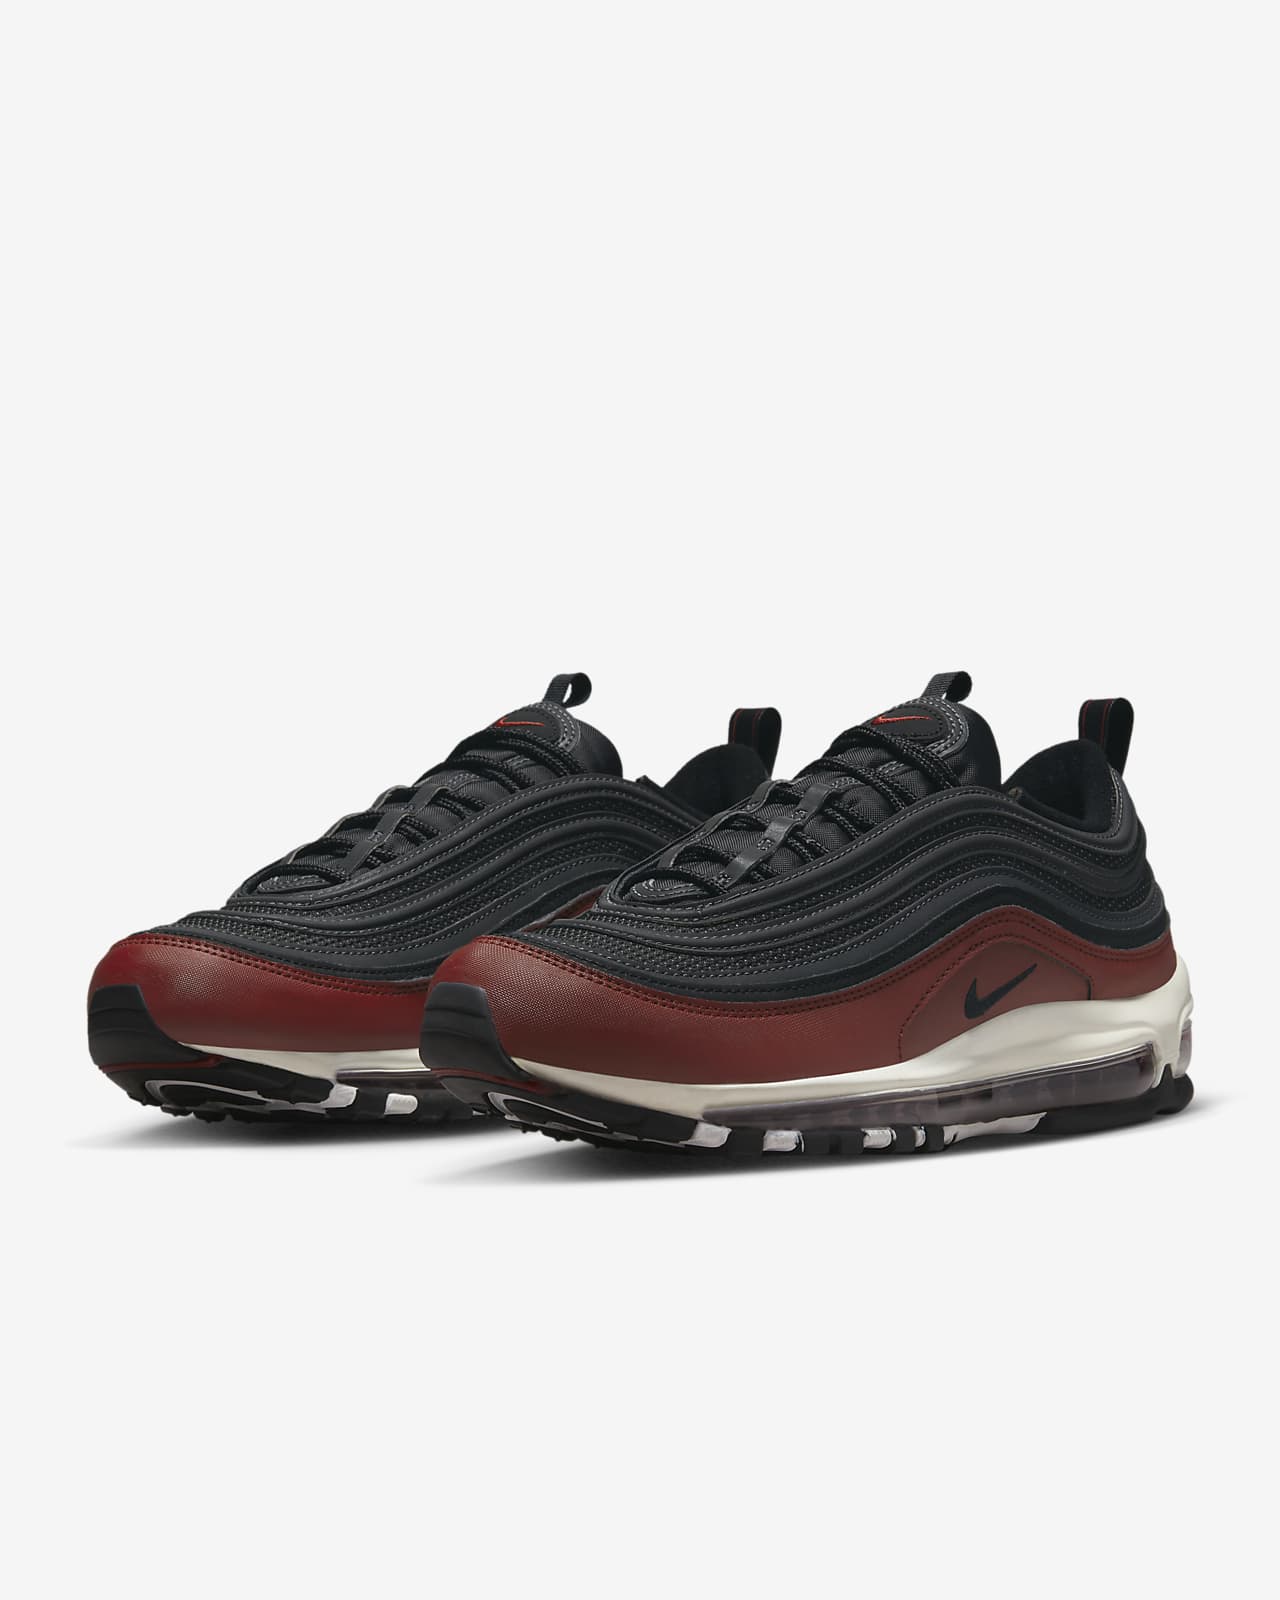 size 12 nike air max 97 shoes